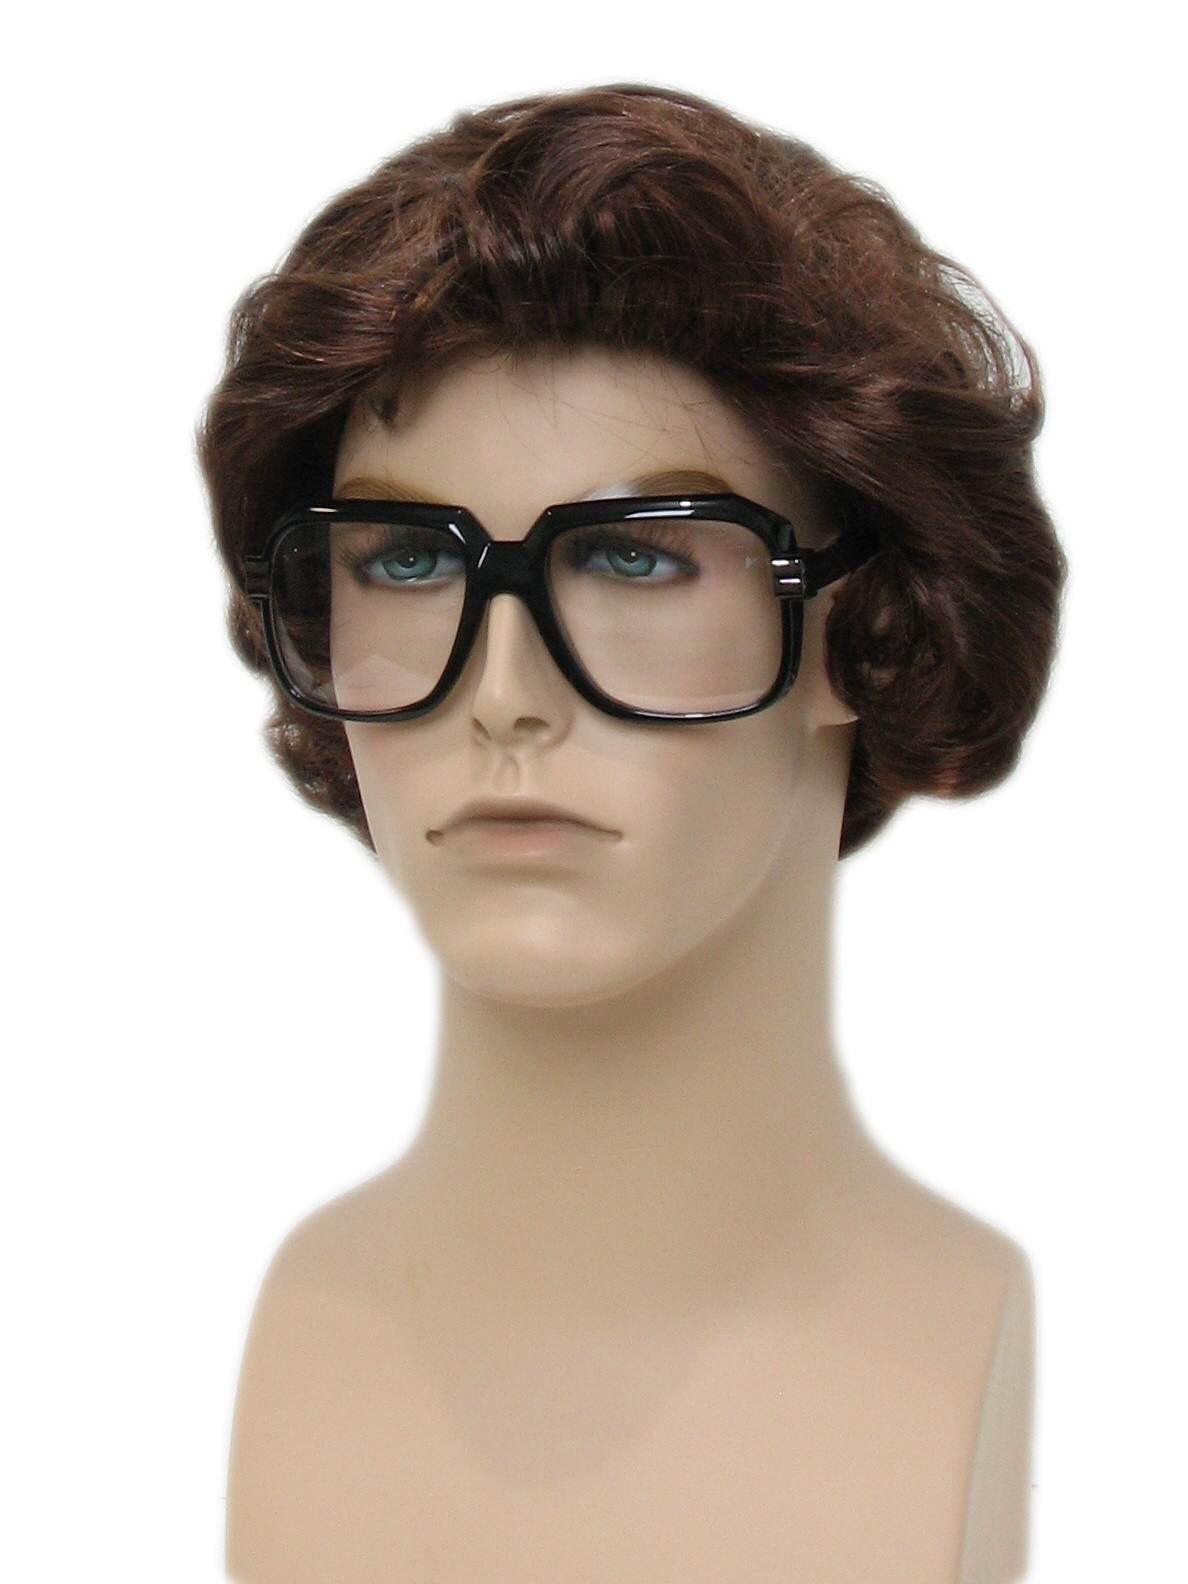 80s Vintage Glasses: 80s Style (made recently) -No Label- Mens square ...